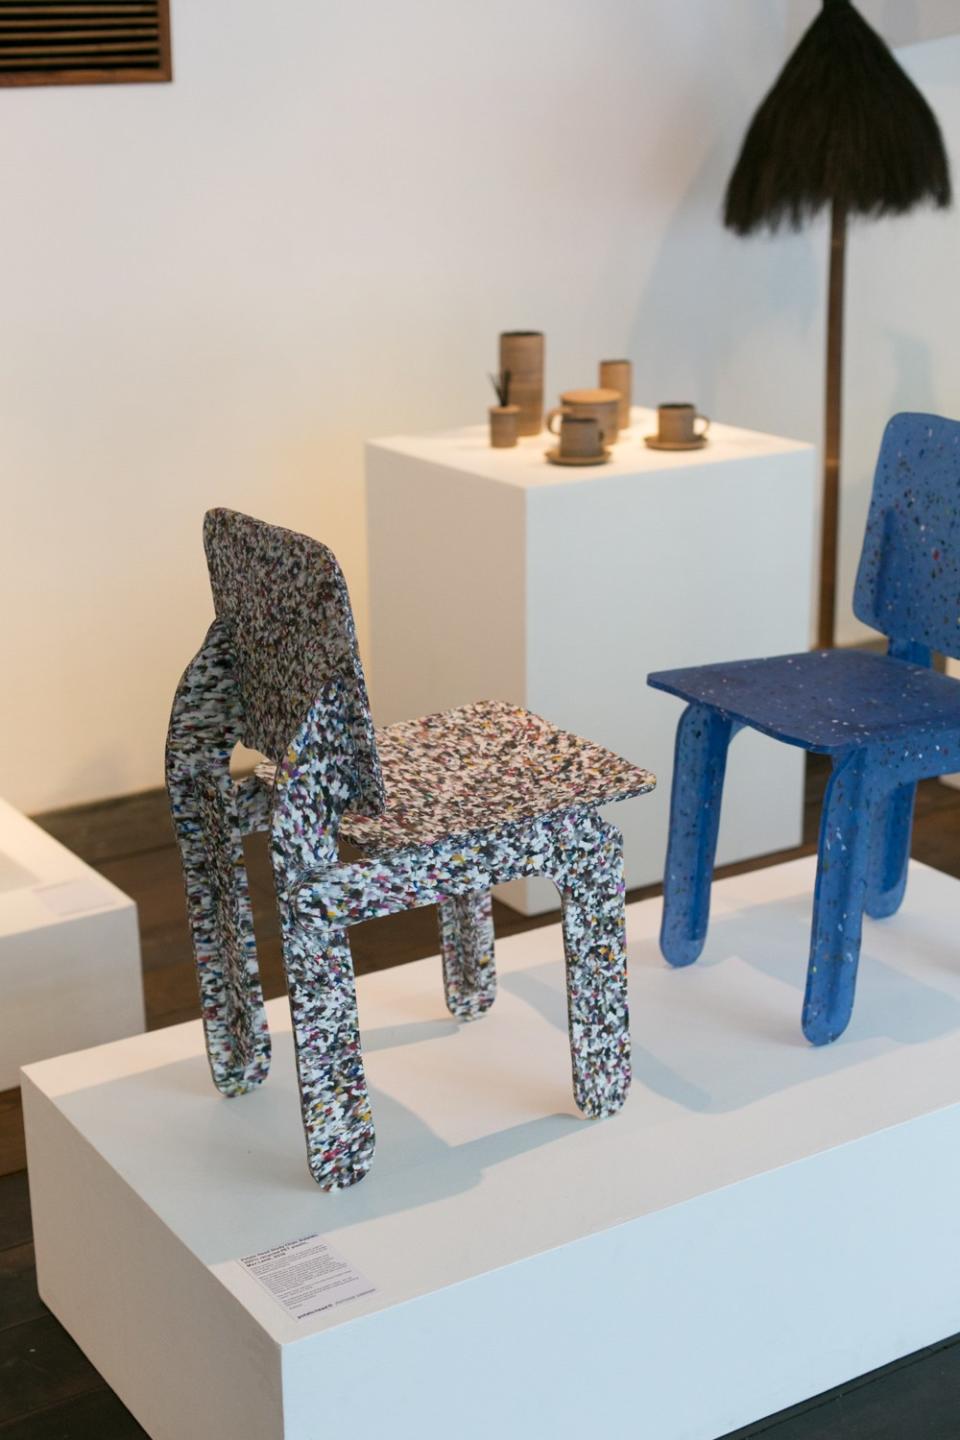 Two festively speckled plastic Study Chairs by Max Lamb.